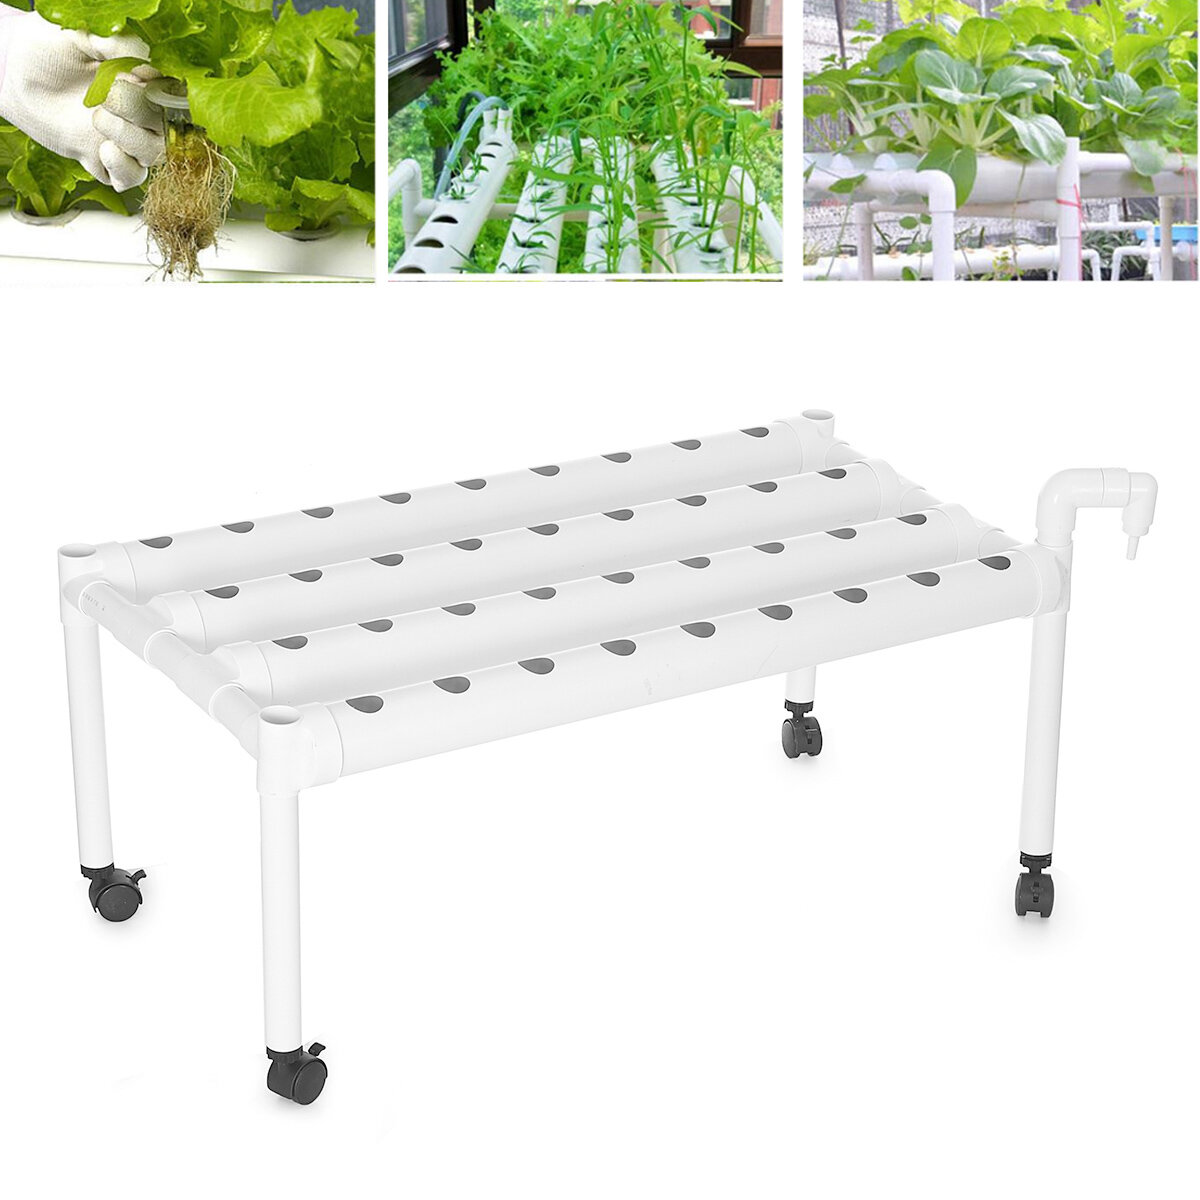 best price,1,layer,hydroponic,grow,kit,36,plant,site,eu,coupon,price,discount